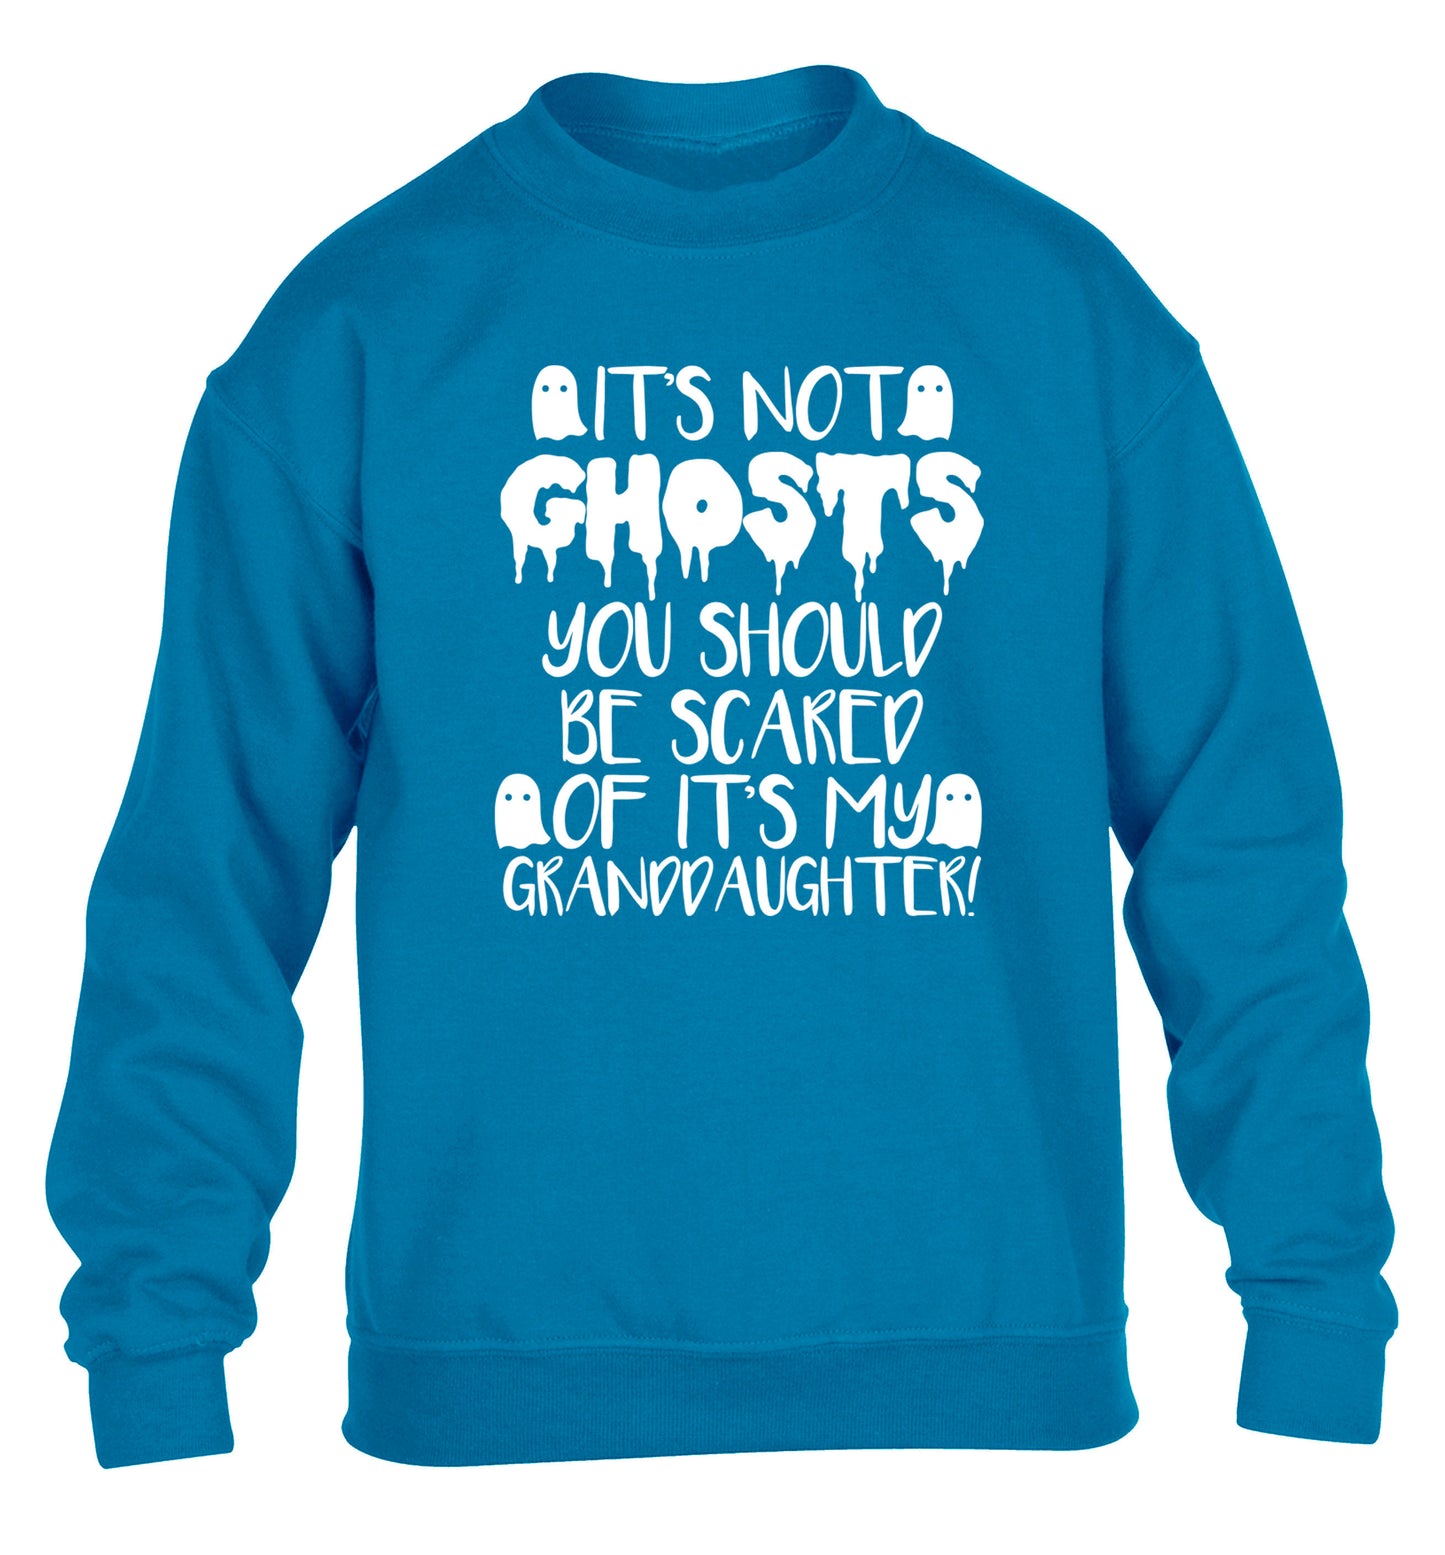 It's not ghosts you should be scared of it's my granddaughter! children's blue sweater 12-14 Years